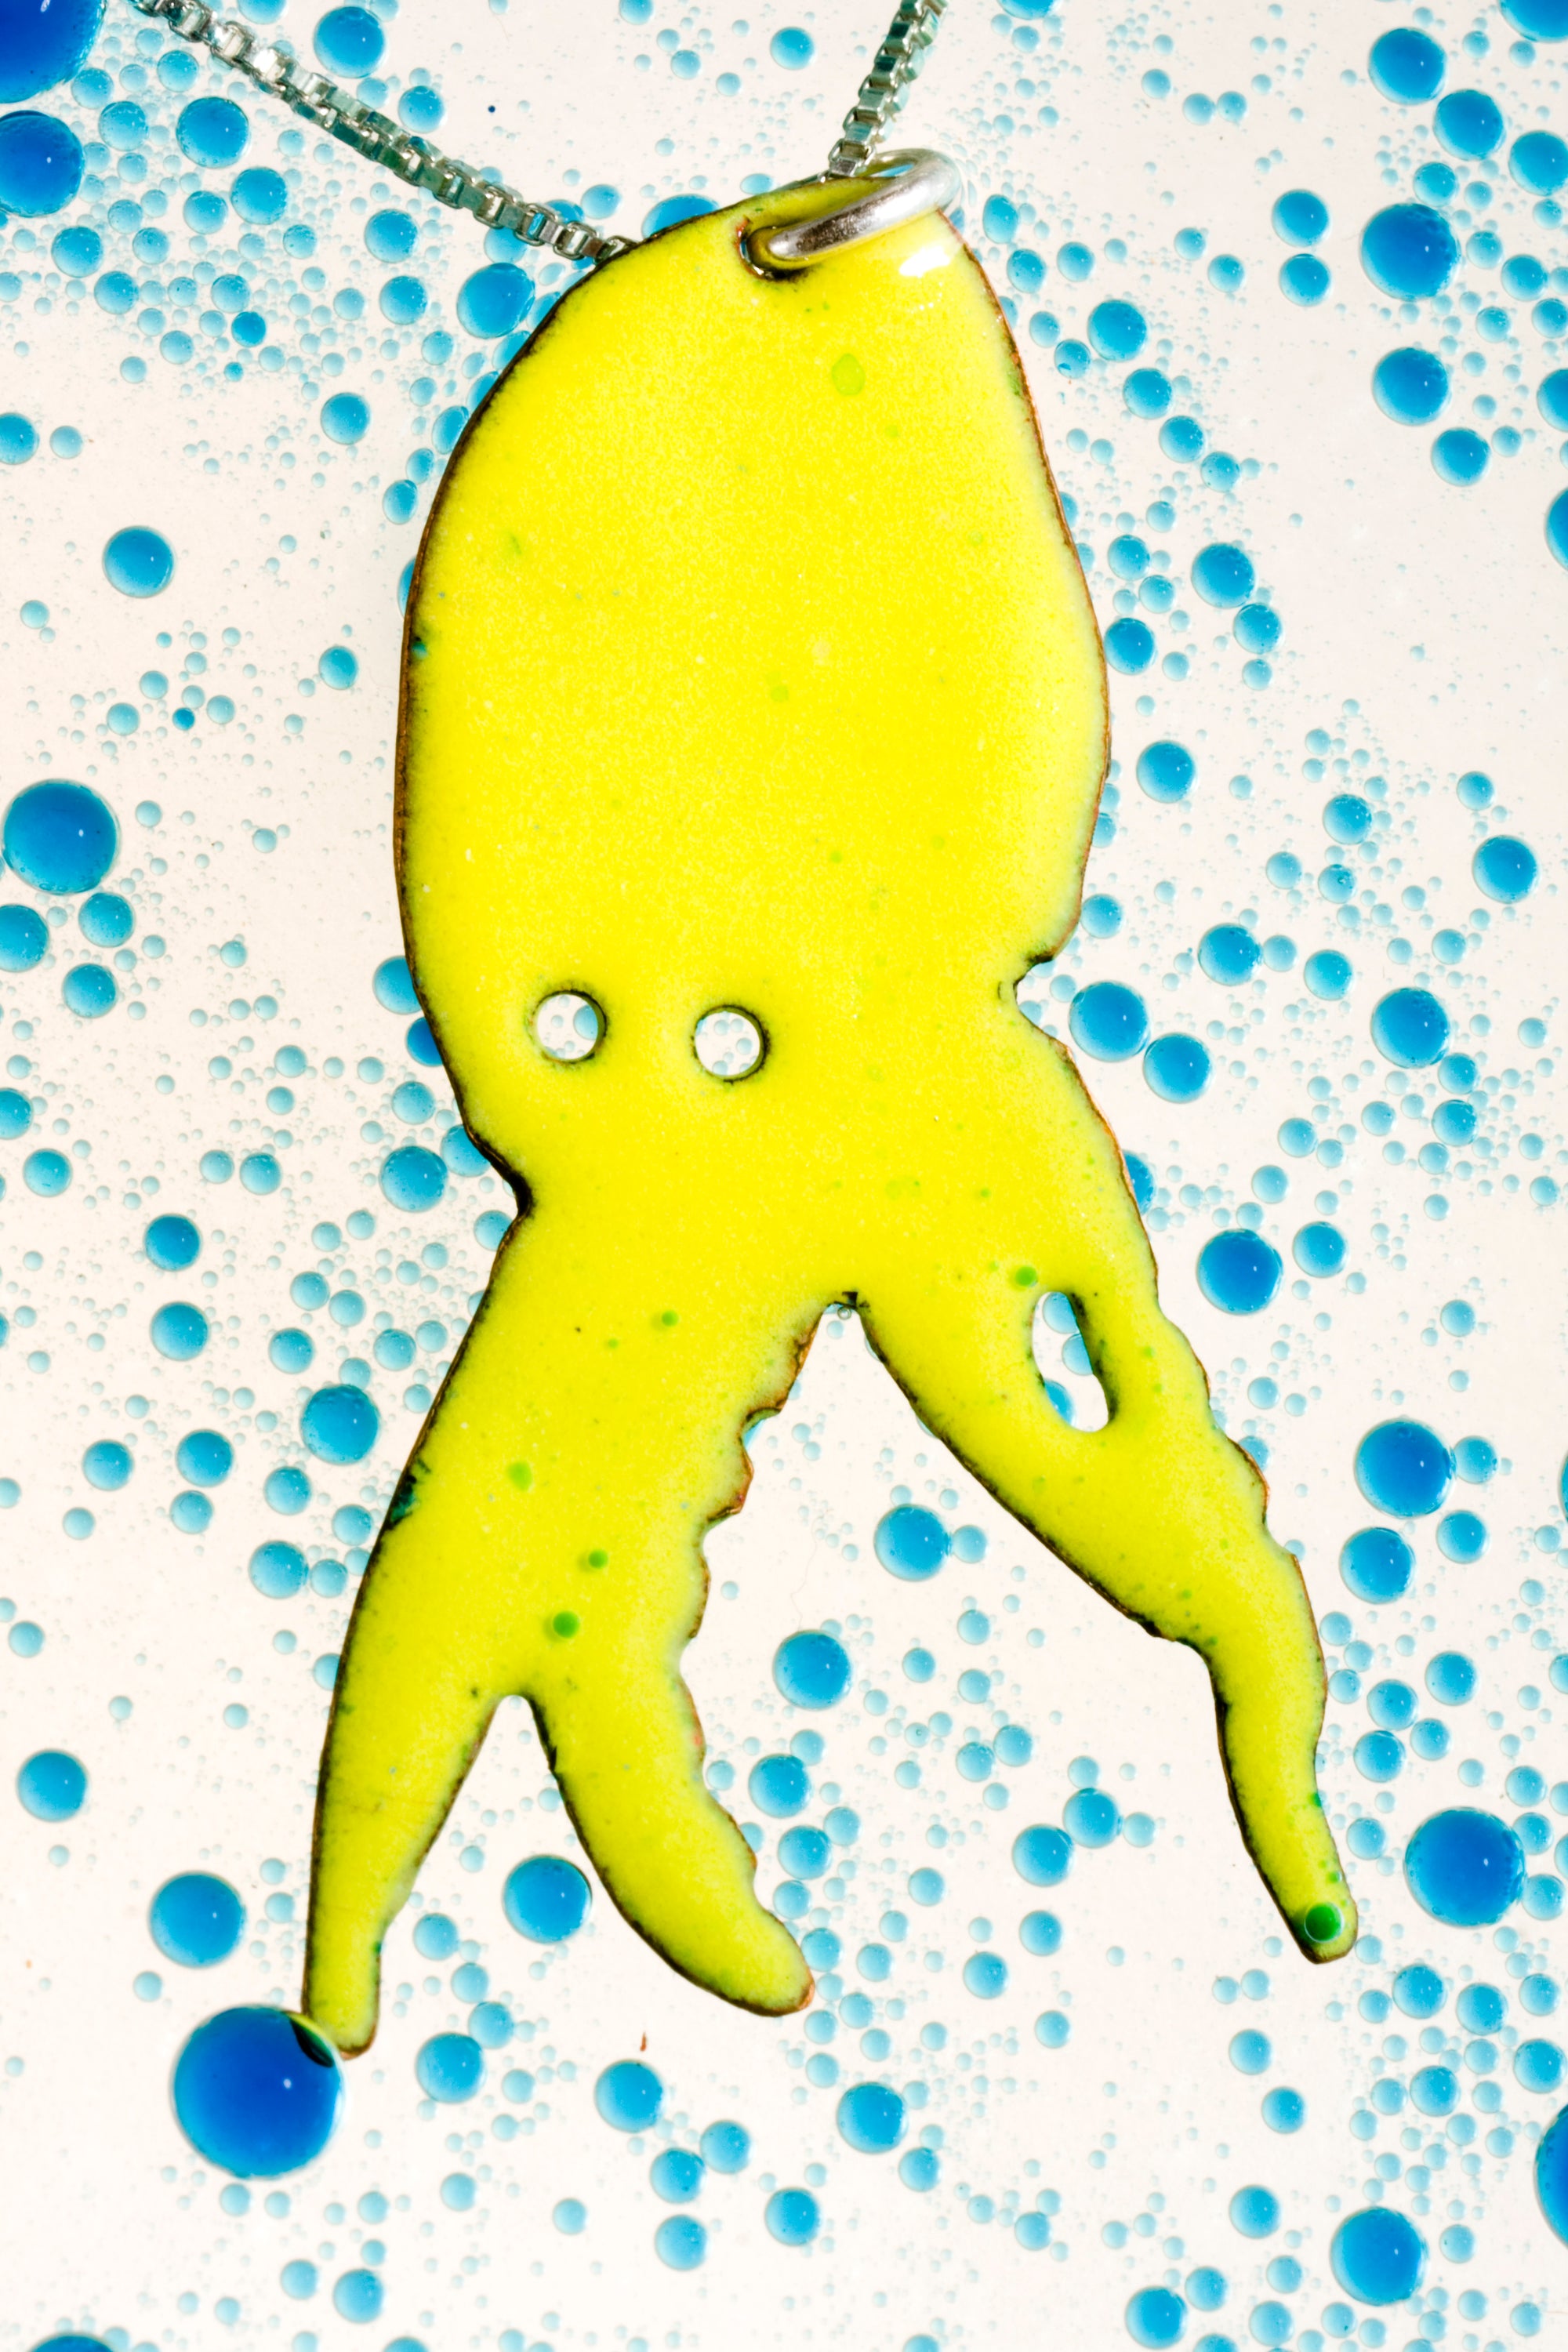 glass enamelled squid silhouette, profile of squid with cutout eyes, bright lime green vitreous glass enamel, fired to a high gloss finish, by peggy skemp 2008, sold at Wolfbait and B Girls, Chicago, IL. Photo with blue bubbles by AJ Kane.